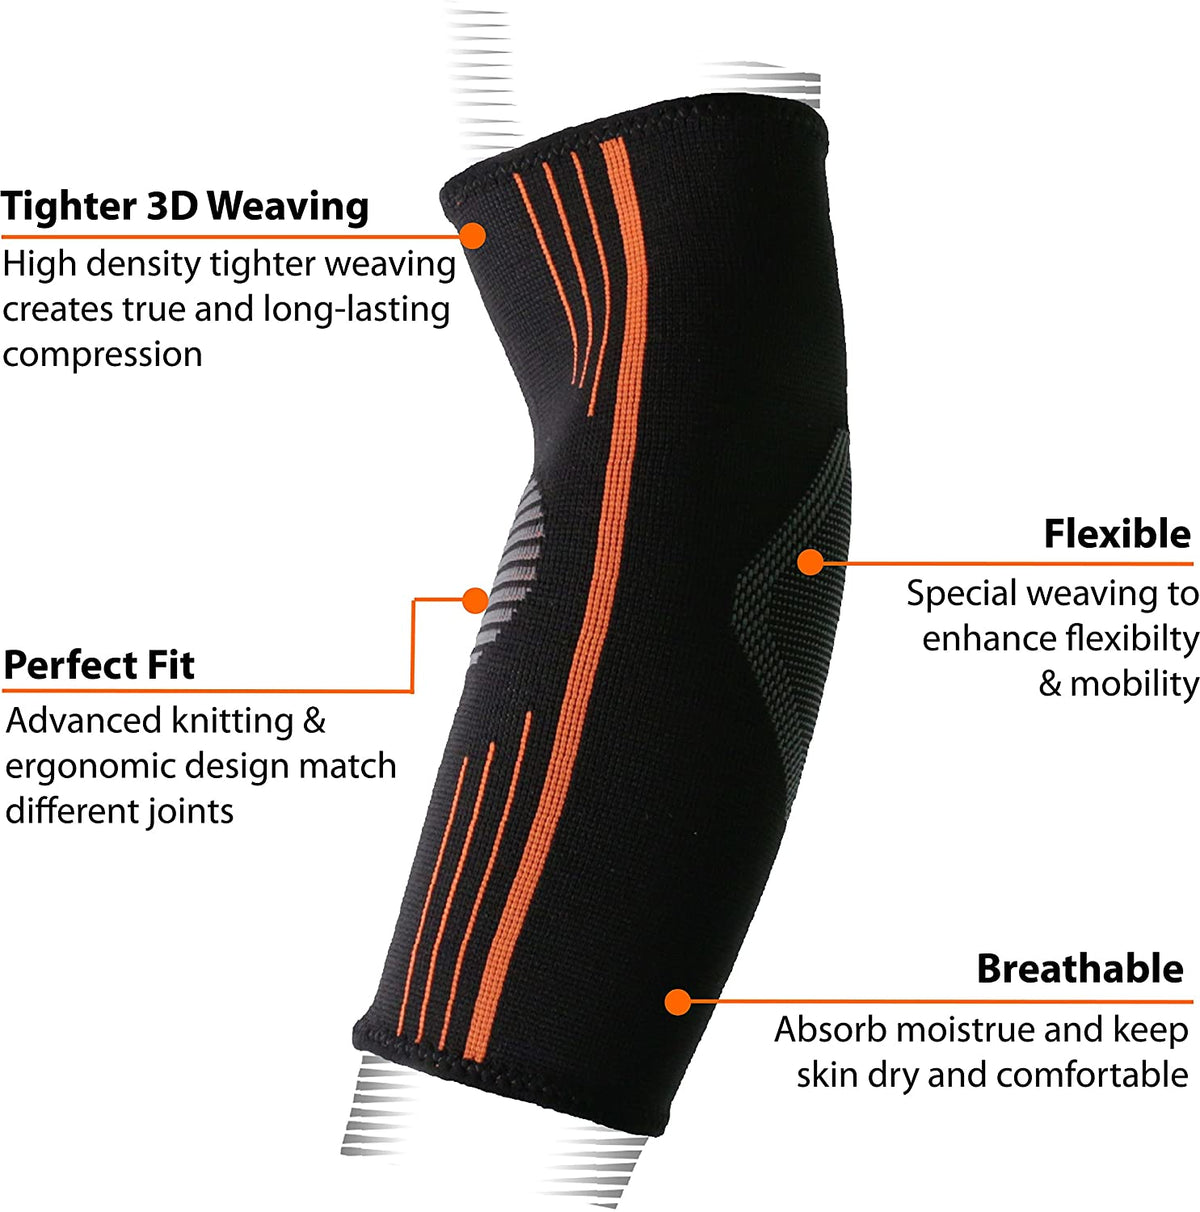 NeoAlly® Compression Elbow Sleeves | Breathable, Long-Lasting Compression | NeoAllySports.com